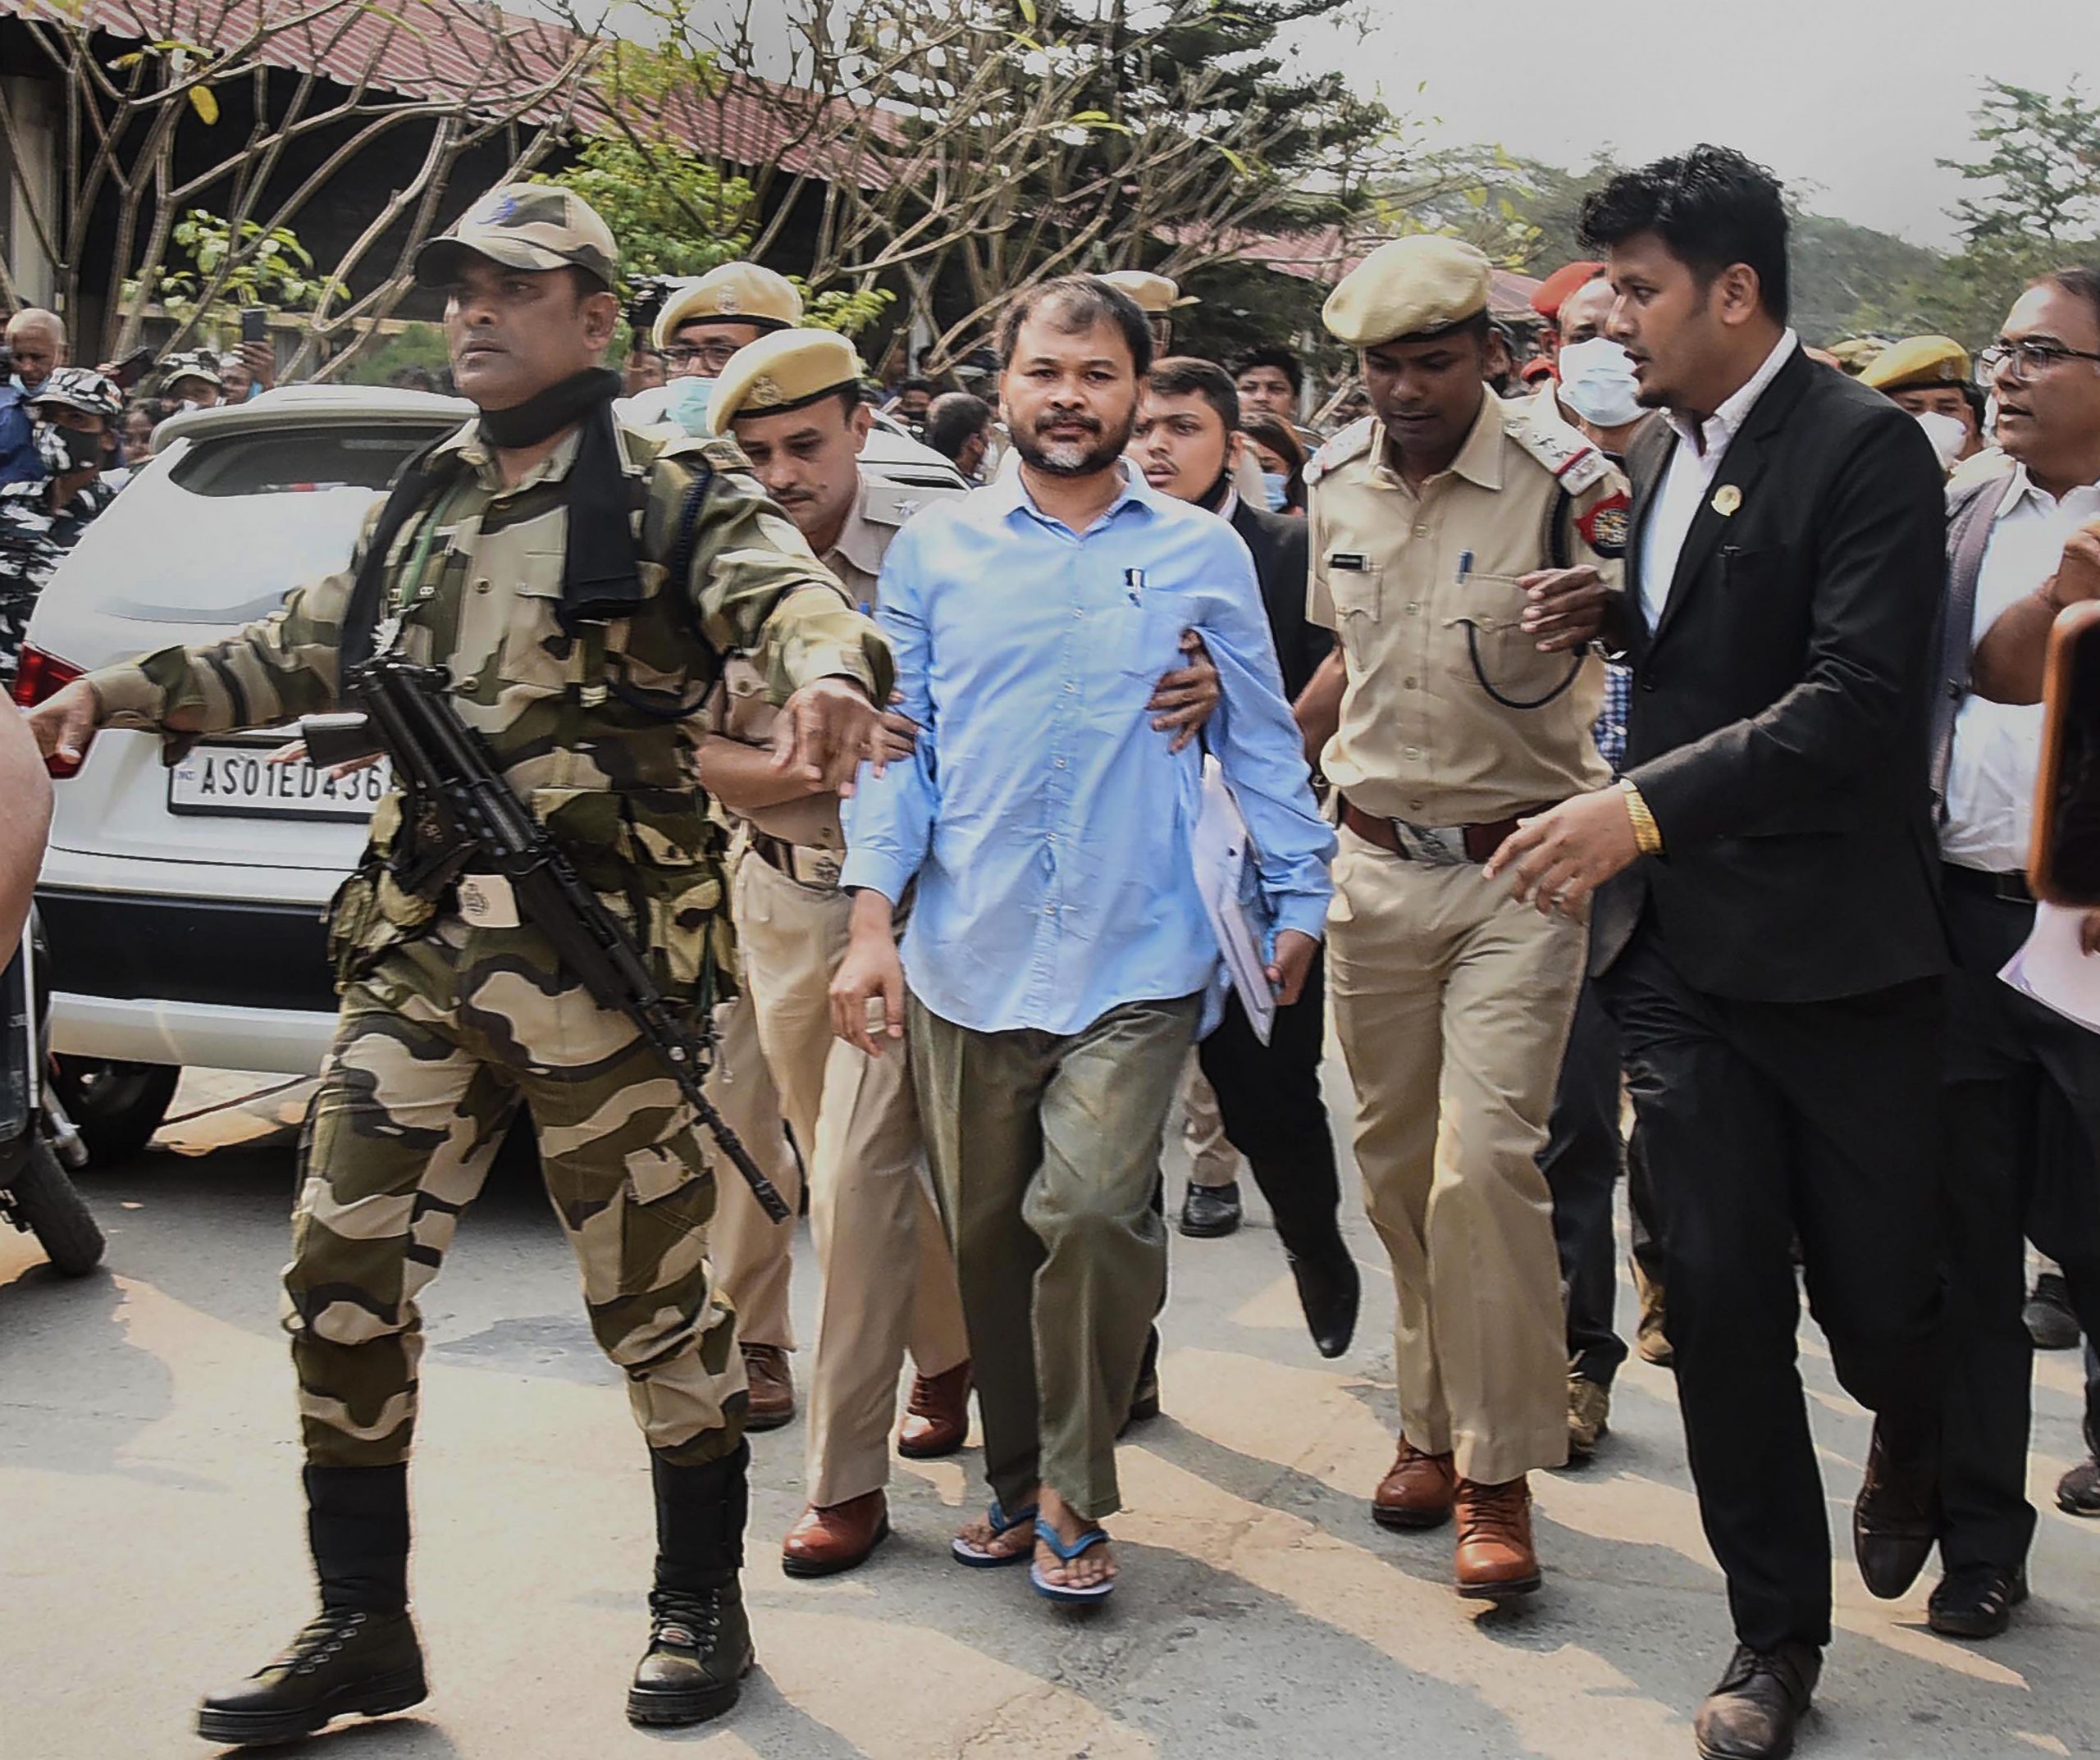 Activists Akhil Gogoi, Pranab Doley to contest Assam polls with few thousand rupees in pockets